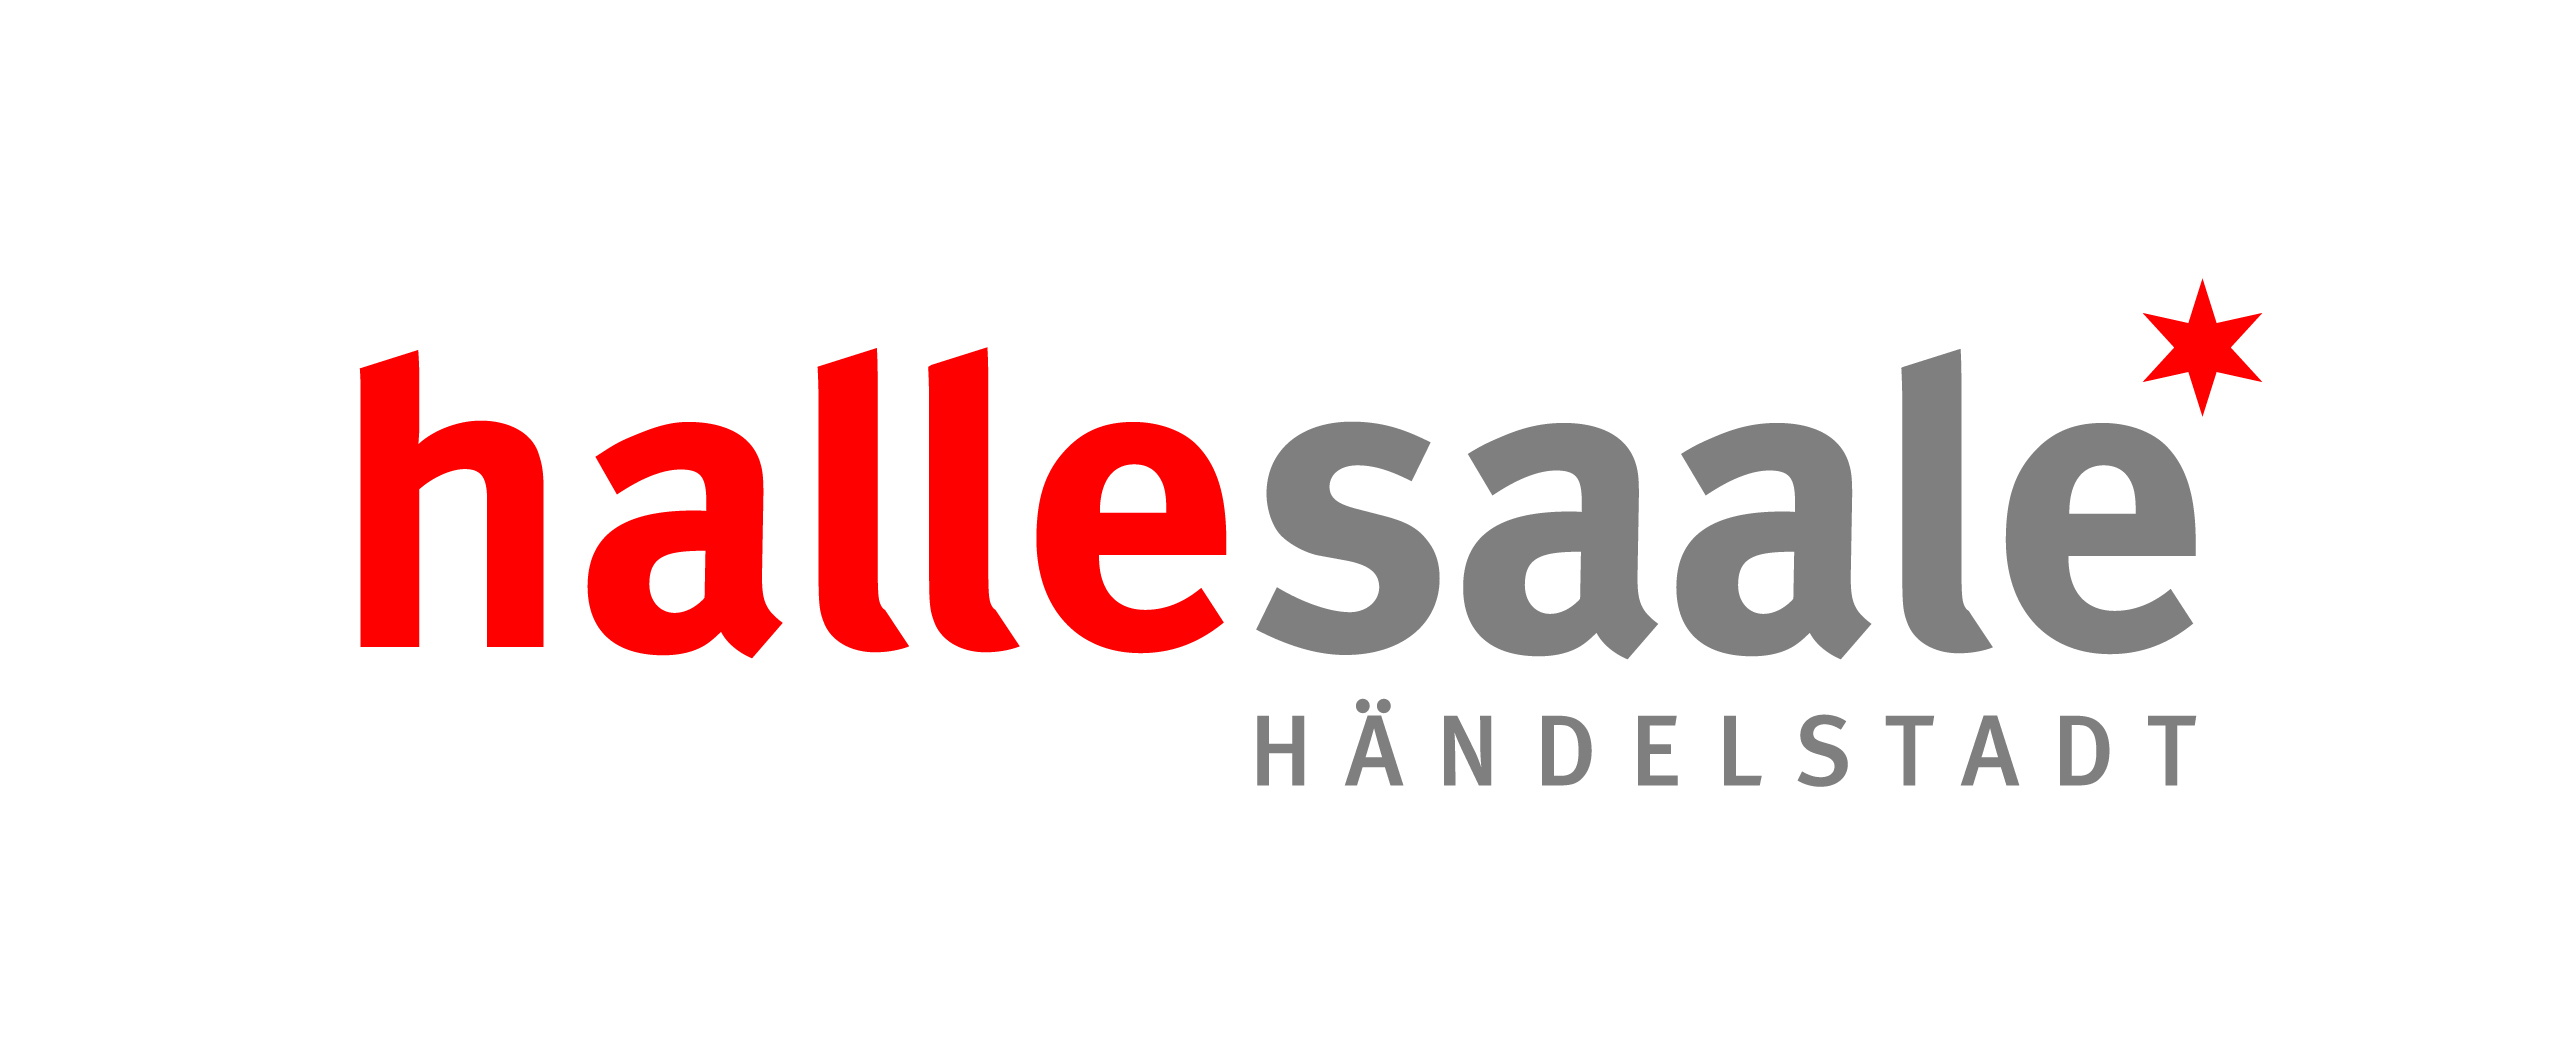 Dating halle saale